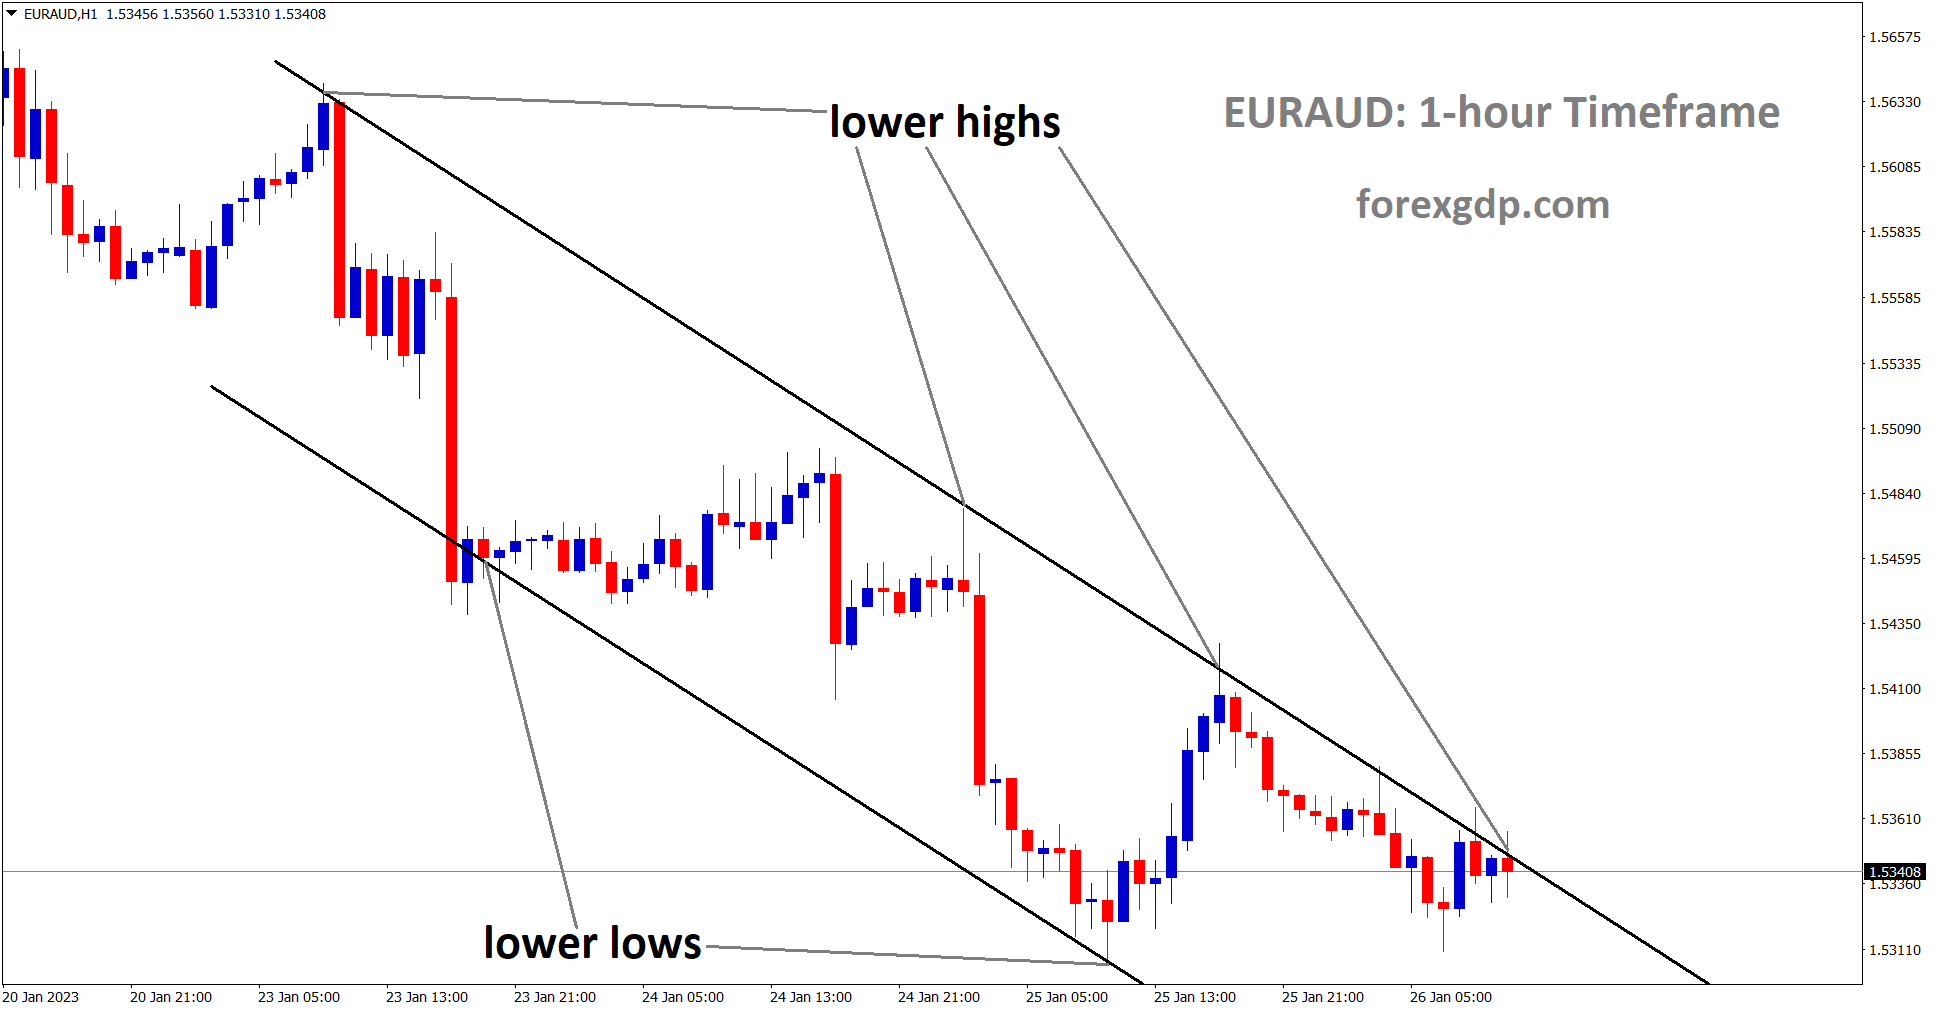 EURAUD is moving in the Descending Channel and the market has reached the lower high area of the channel.